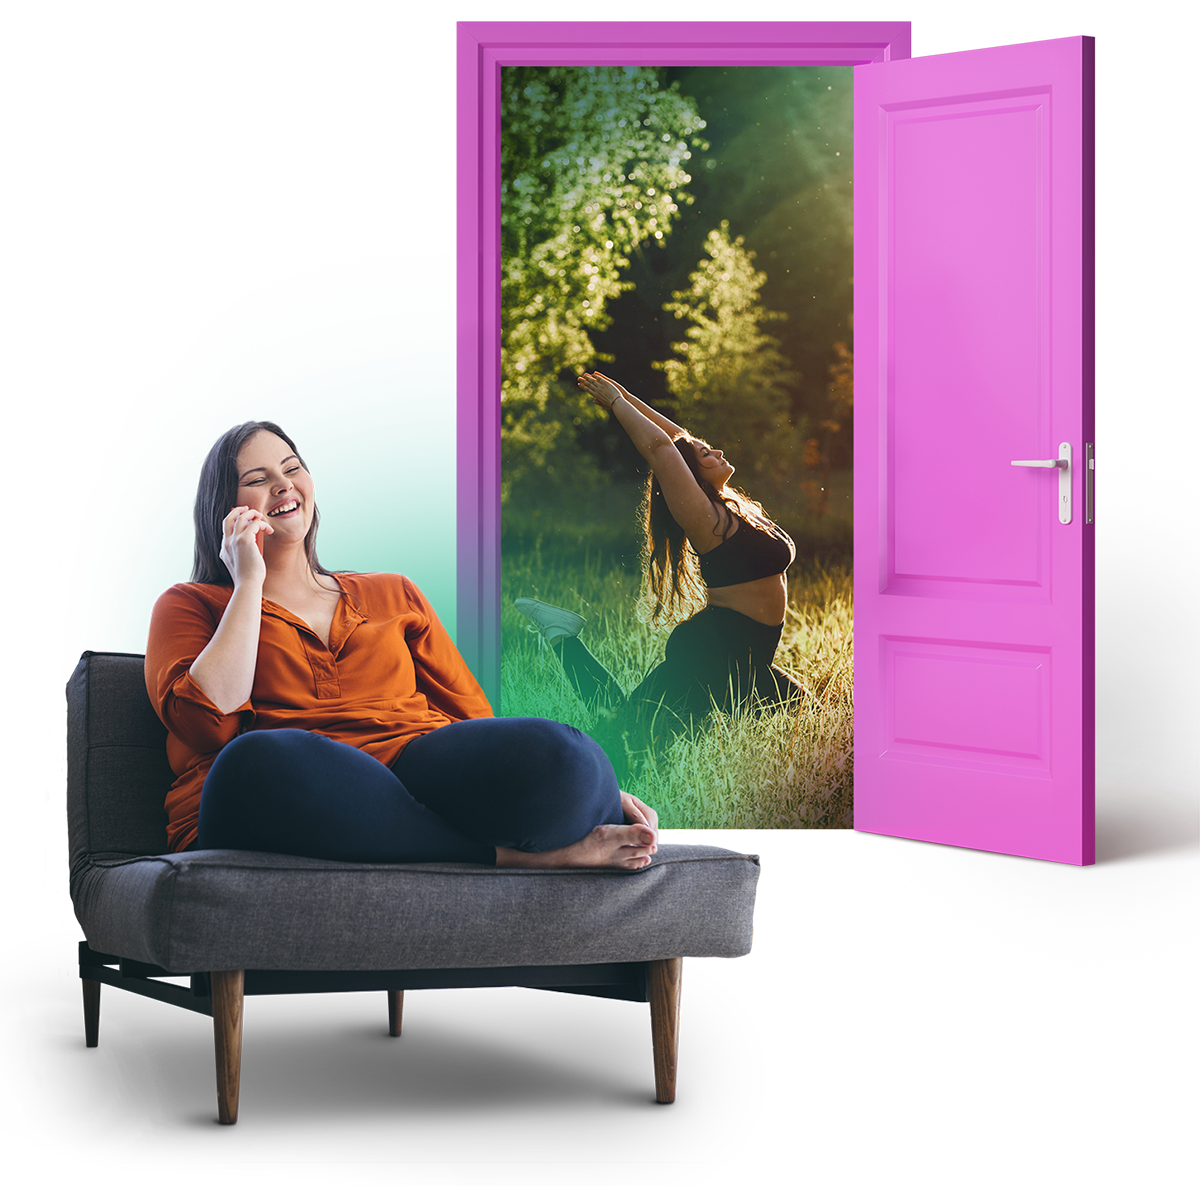 Young woman smiling, while speaking on the phone and seated in front of a bright pink door that is open to a vision of herself practising yoga outdoors.